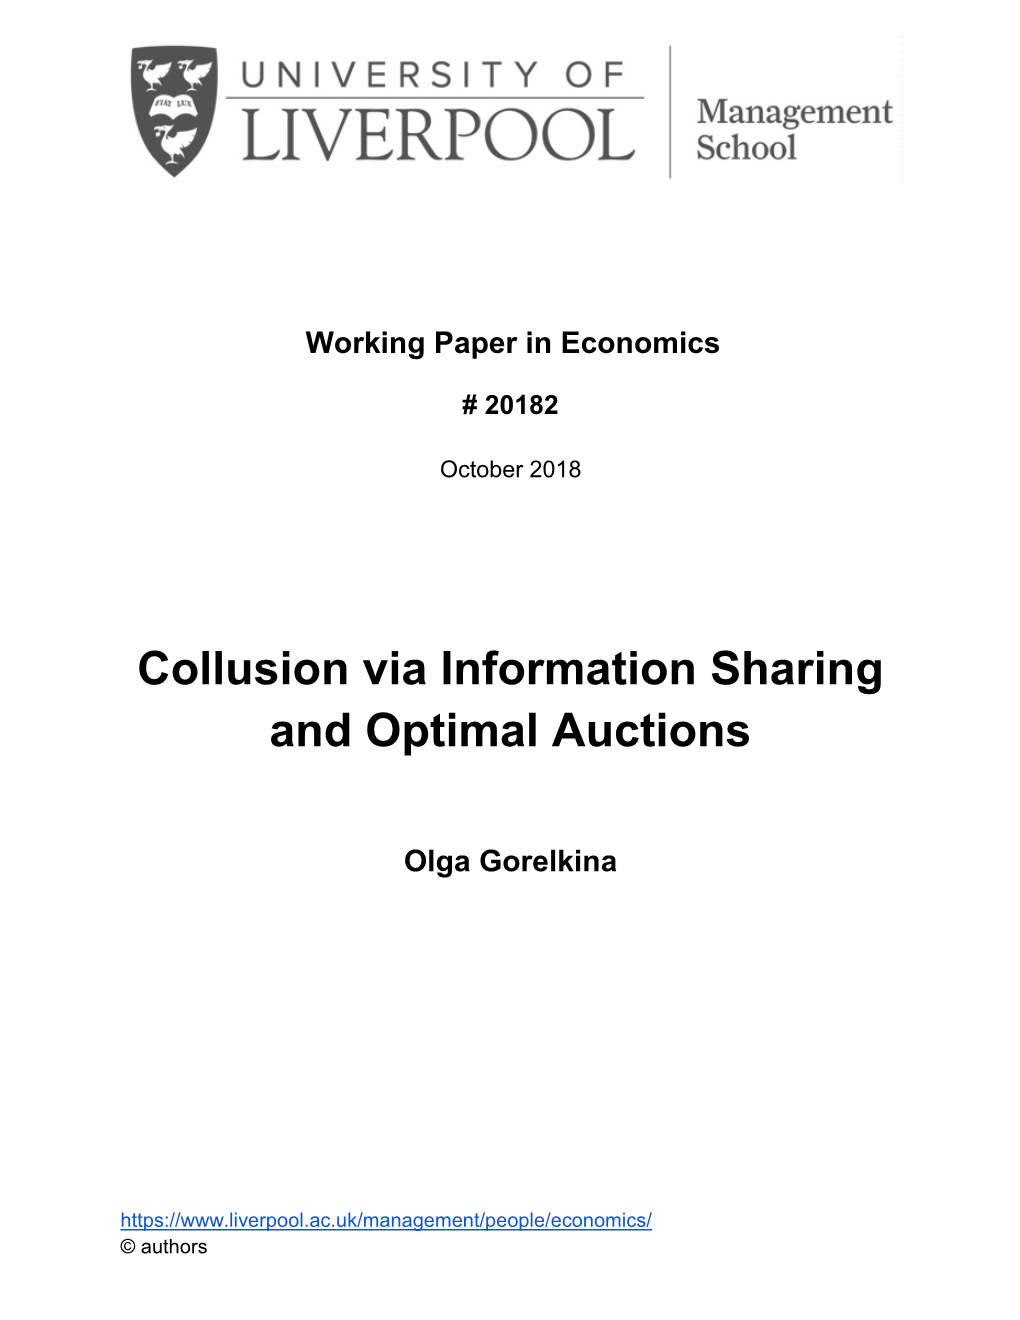 Collusion Via Information Sharing and Optimal Auctions